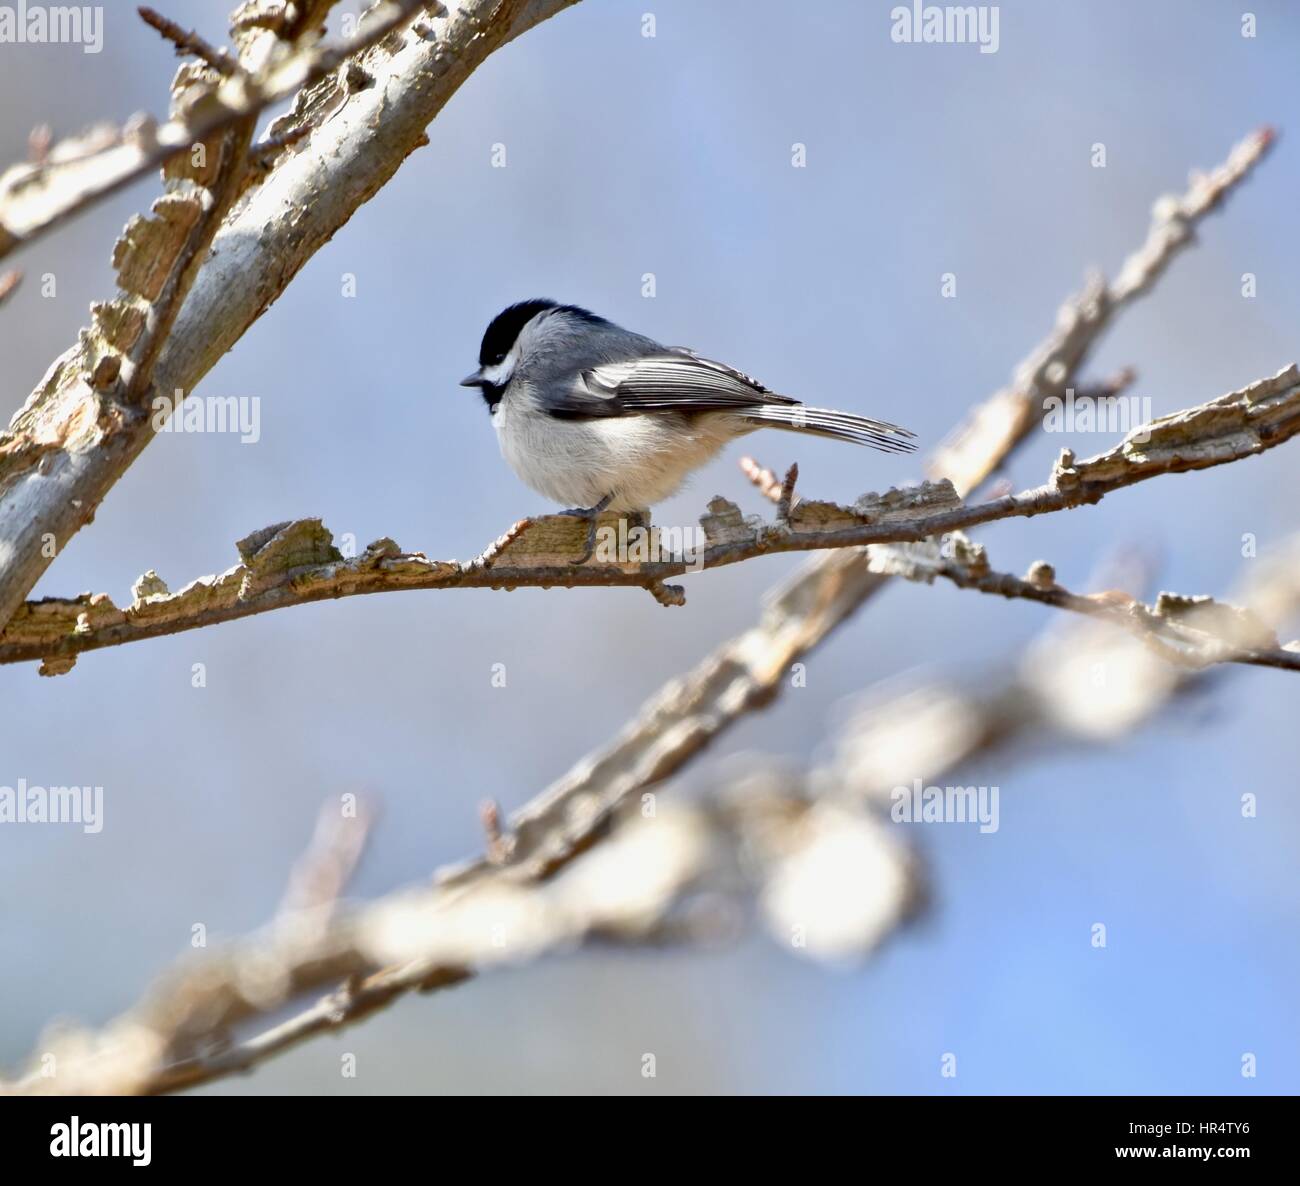 Black-capped chickadee (Poecile atricapillus) perched on a tree branch Stock Photo